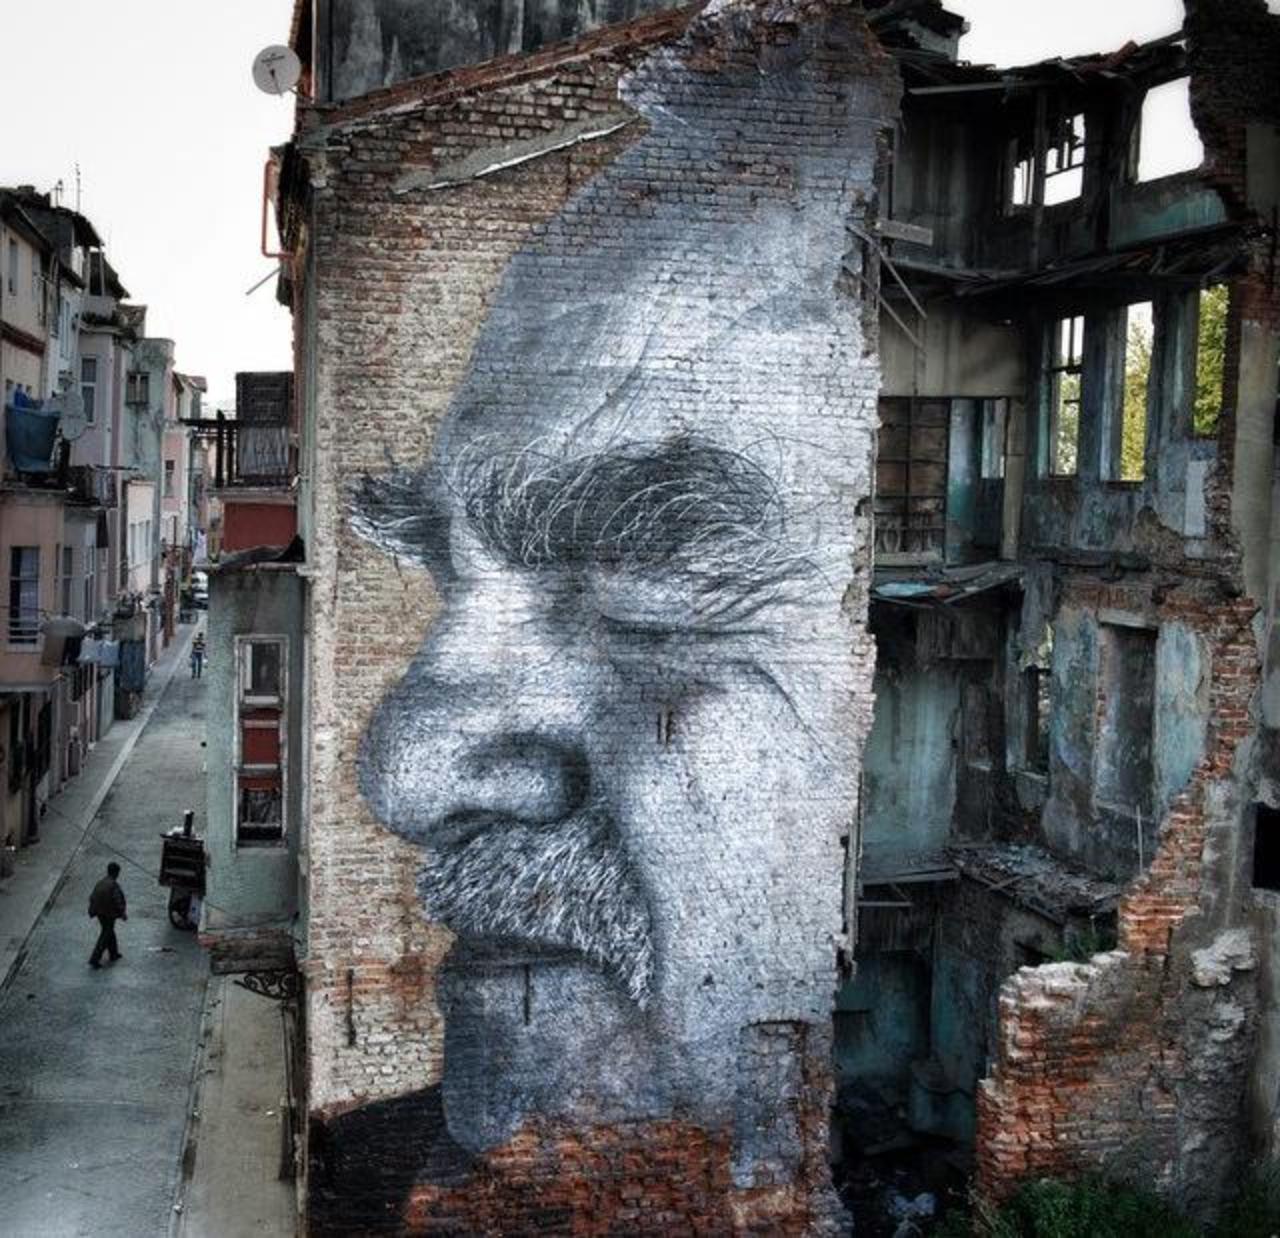 Street Art by JR in Istanbul & after local police painted over it 

#art #arte #graffiti #streetart http://t.co/pSfXw0Rfqk